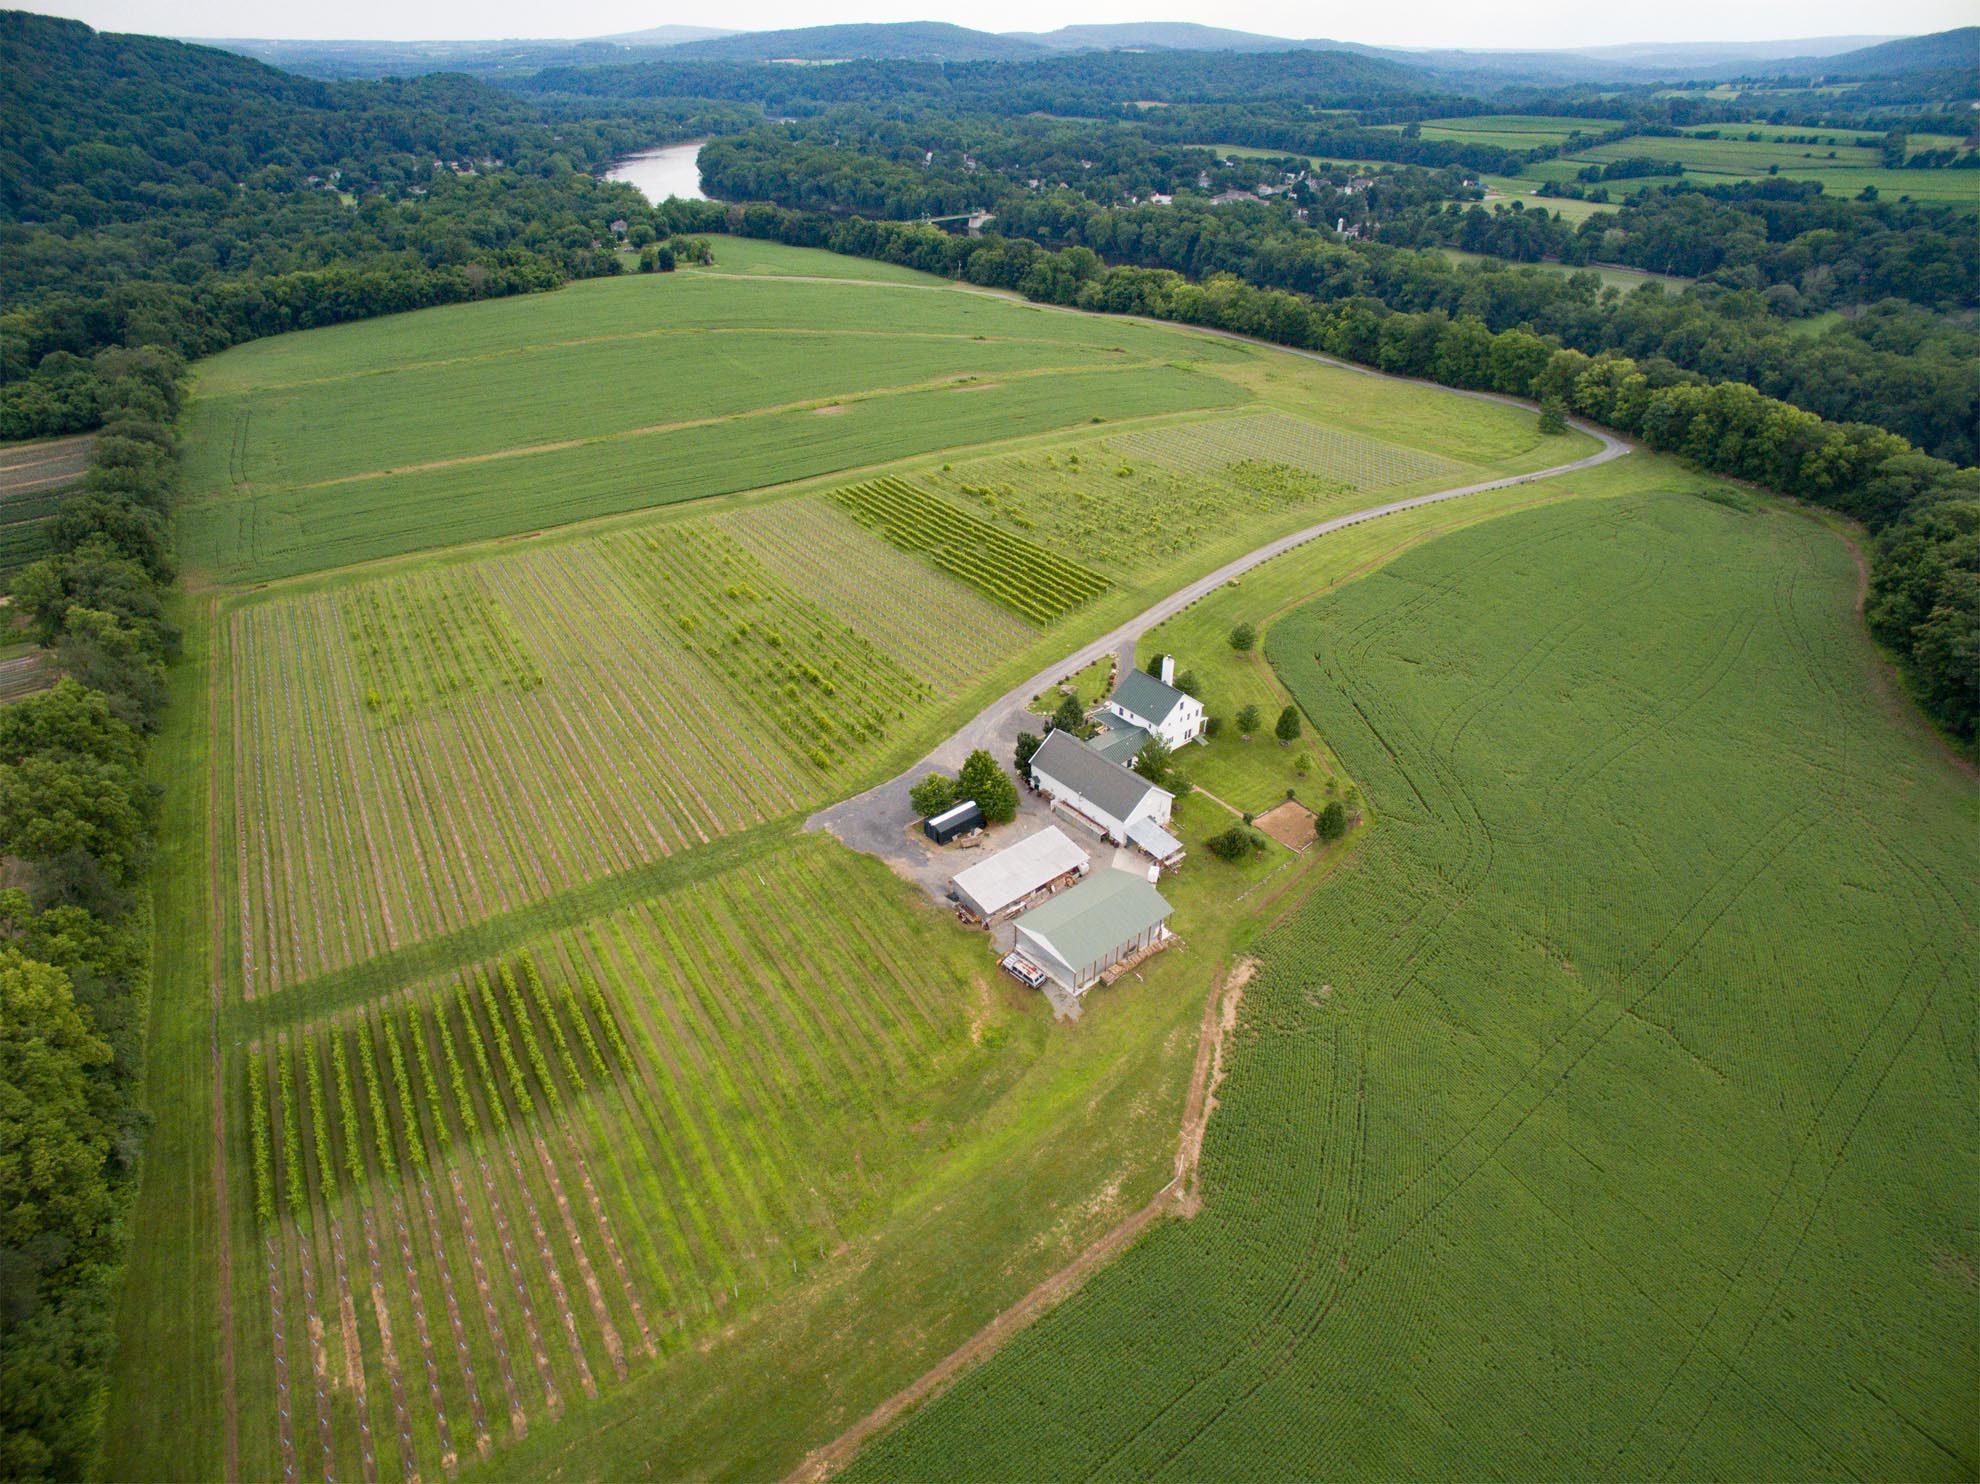 Drone Photograph of Vineyard in New Jersey